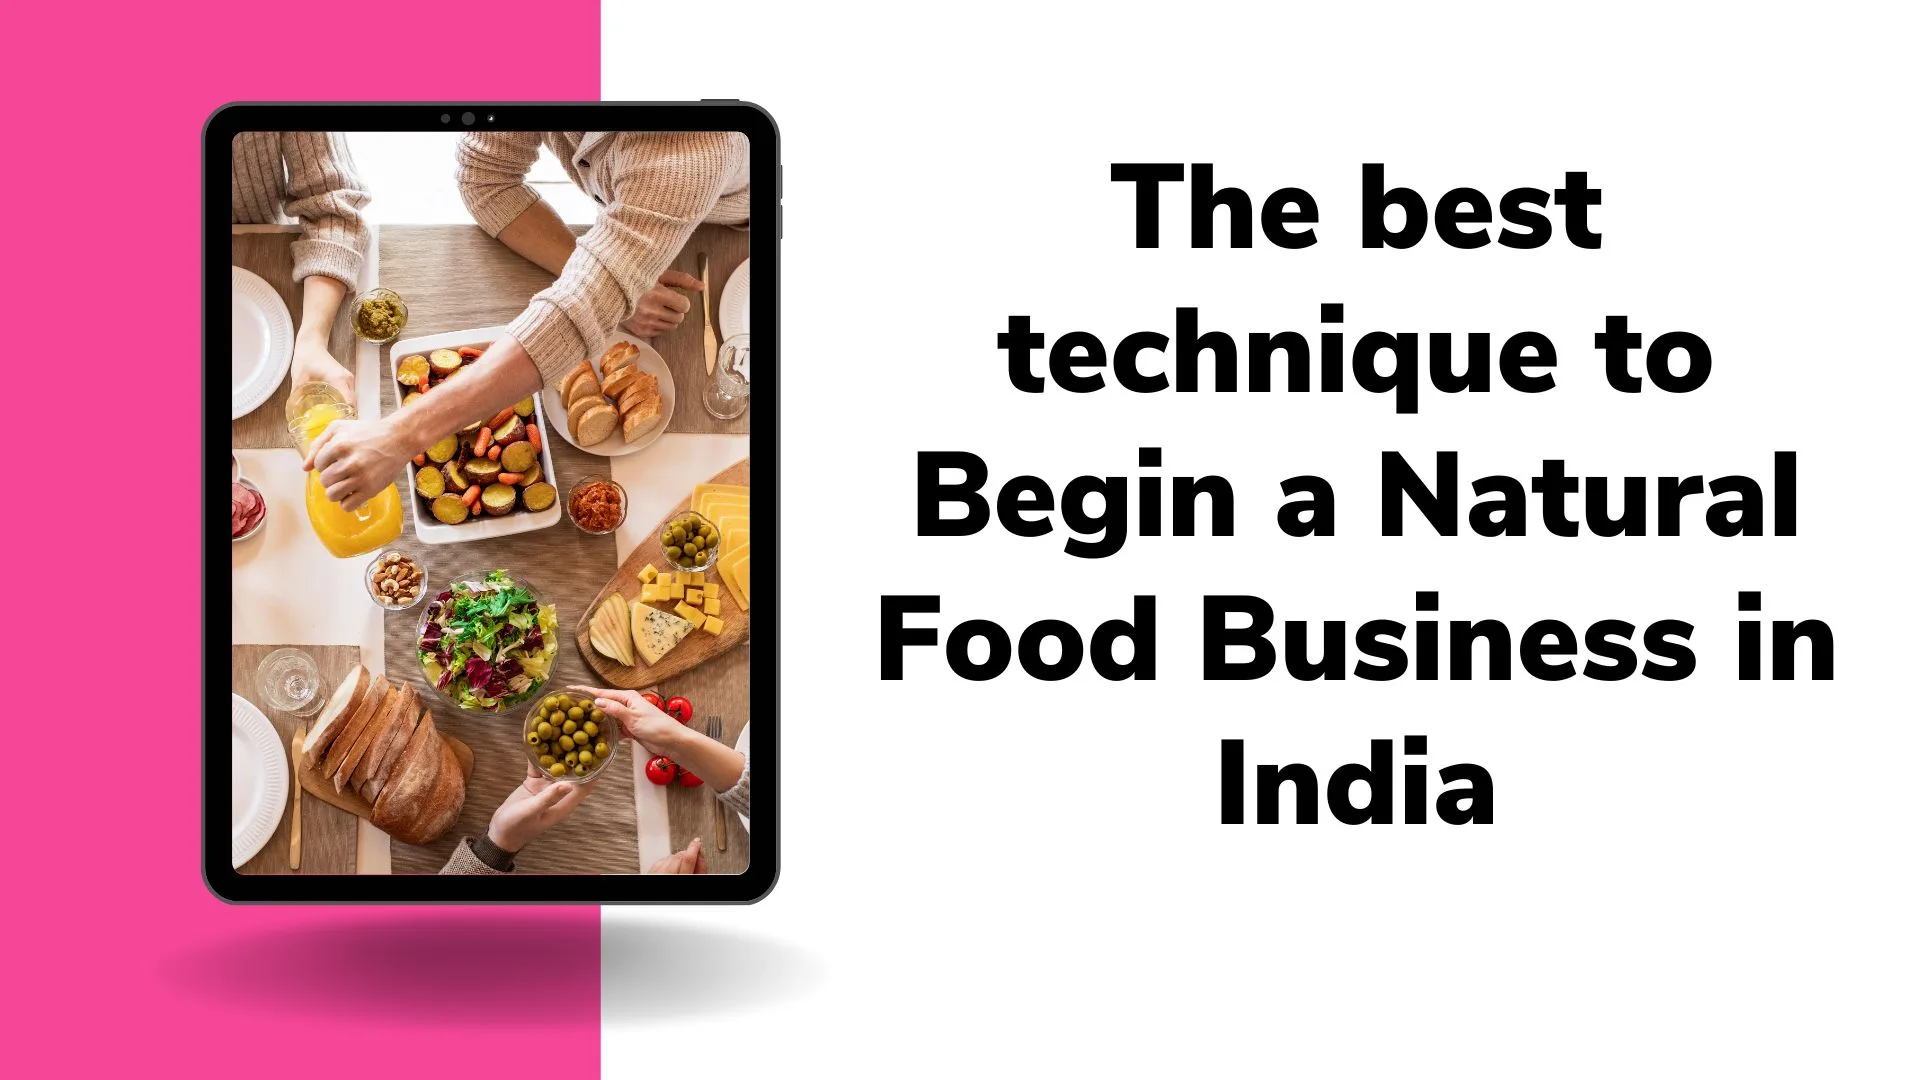 The best technique to Begin a Natural Food Business in India